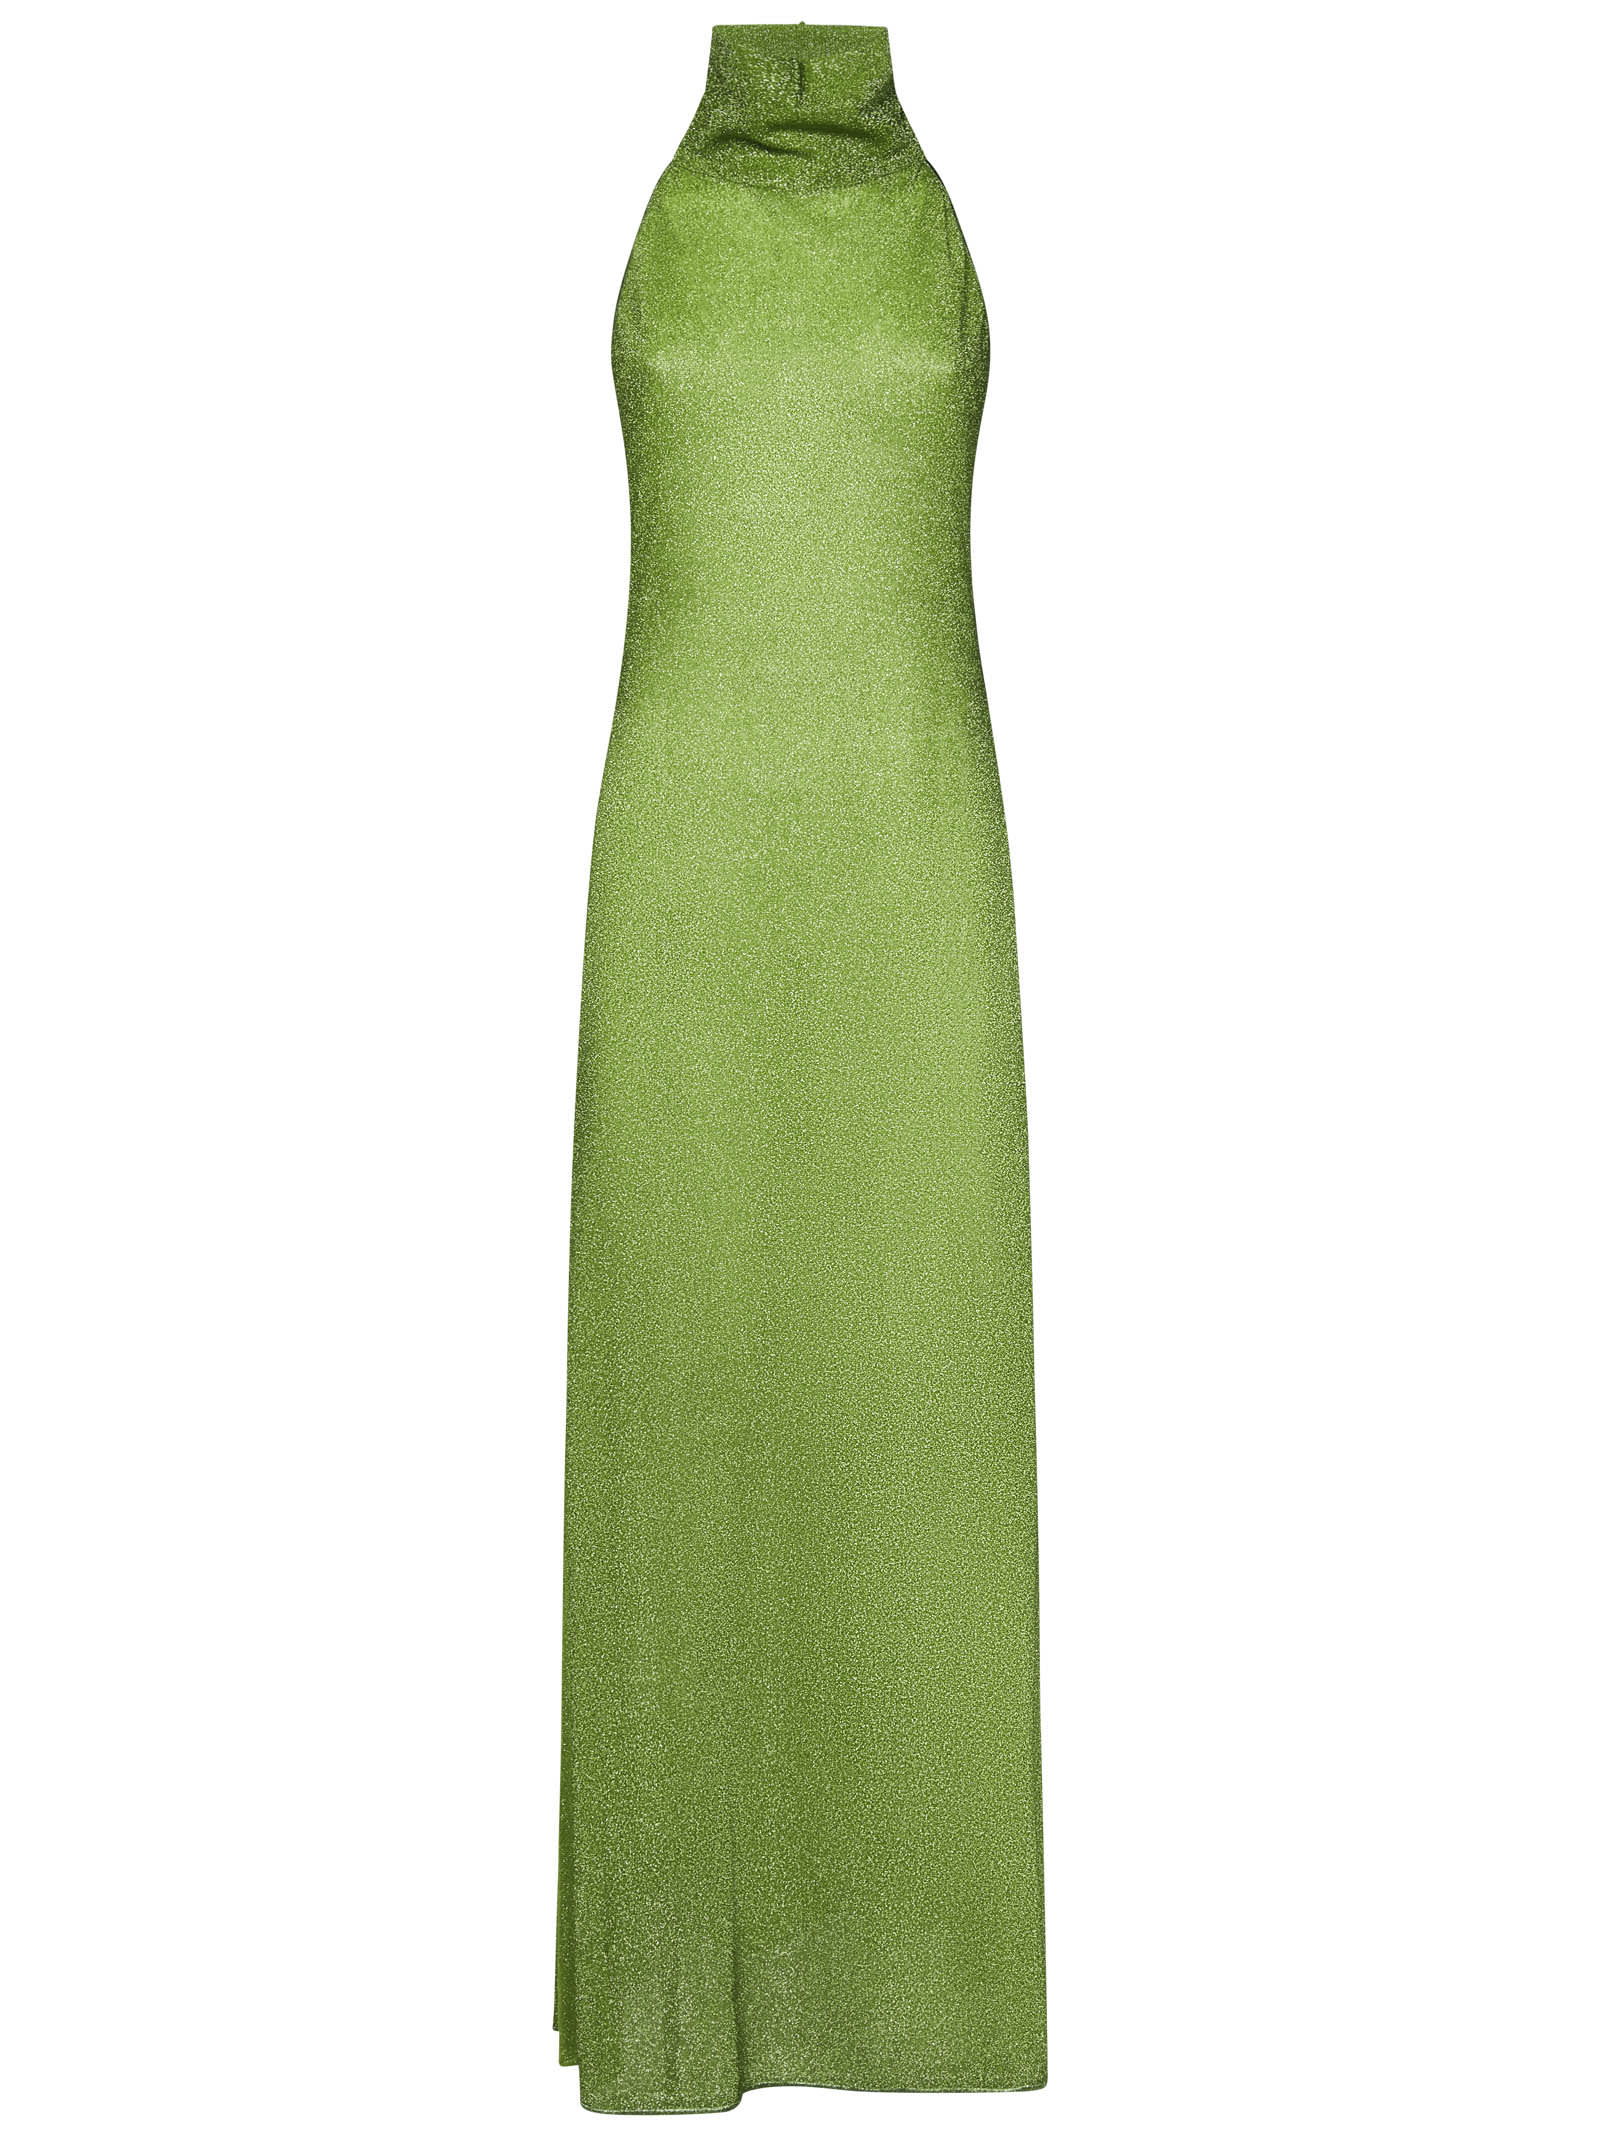 Oseree Lumi Dress In Lime